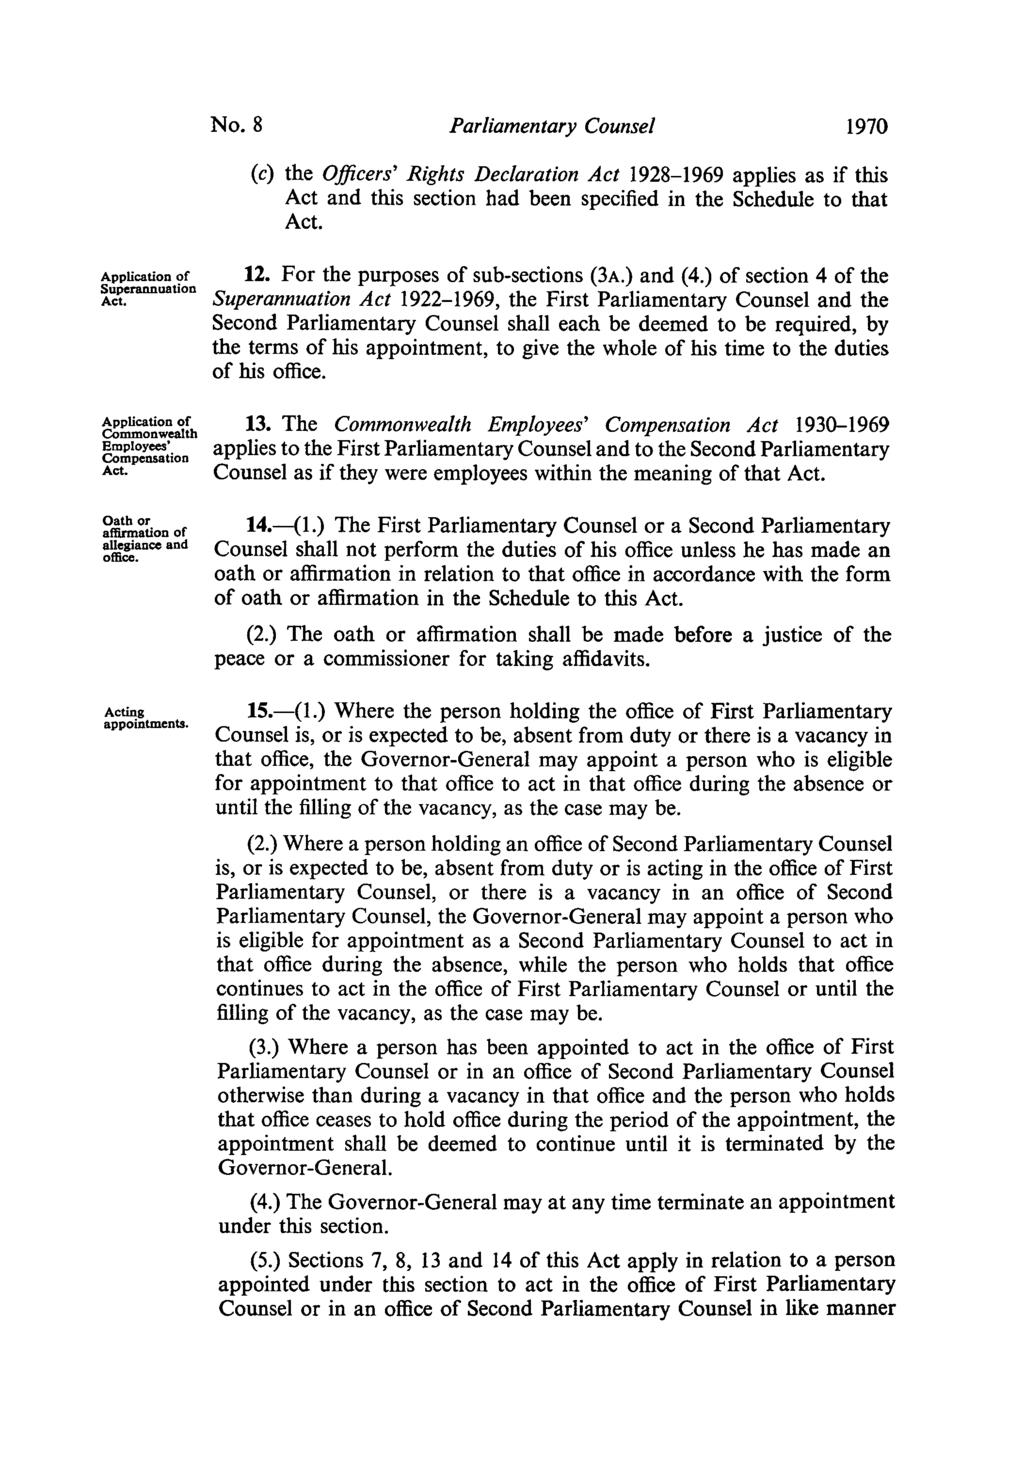 Parliamentary Counsel 1970 (c) the Officers' Rights Declaration Act 1928-1969 applies as if this Act and this section had been specified in the Schedule to that Application of Superannuation 12.